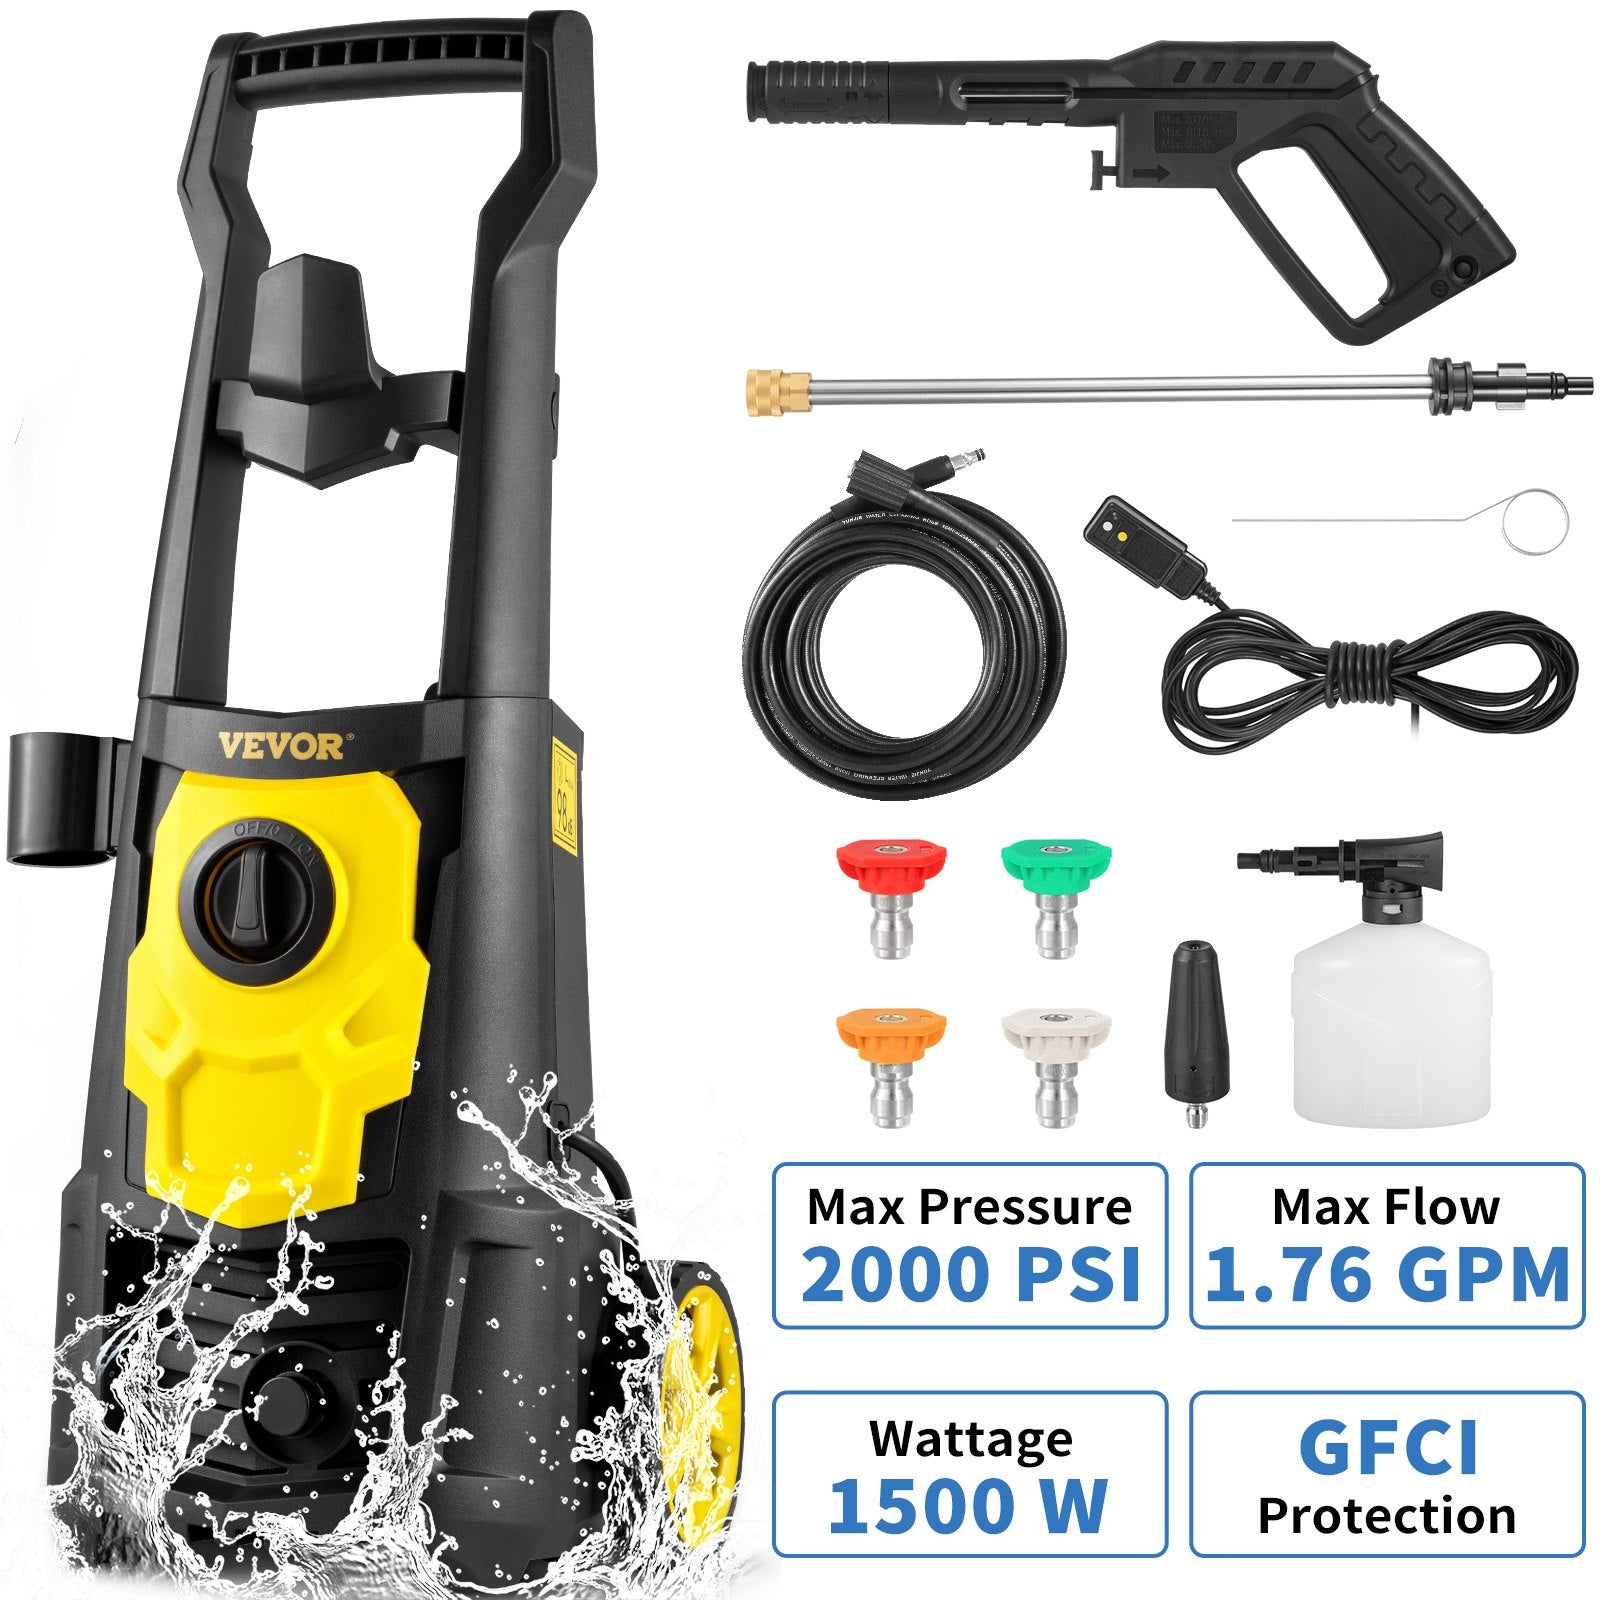 VEVOR Electric Pressure Washer, 2000 PSI, Max. 1.76 GPM Power Washer w/ 30 ft Hose, 5 Quick Connect Nozzles, Foam Cannon, Portable to Clean Patios, Cars, Fences, Driveways, ETL Listed-6